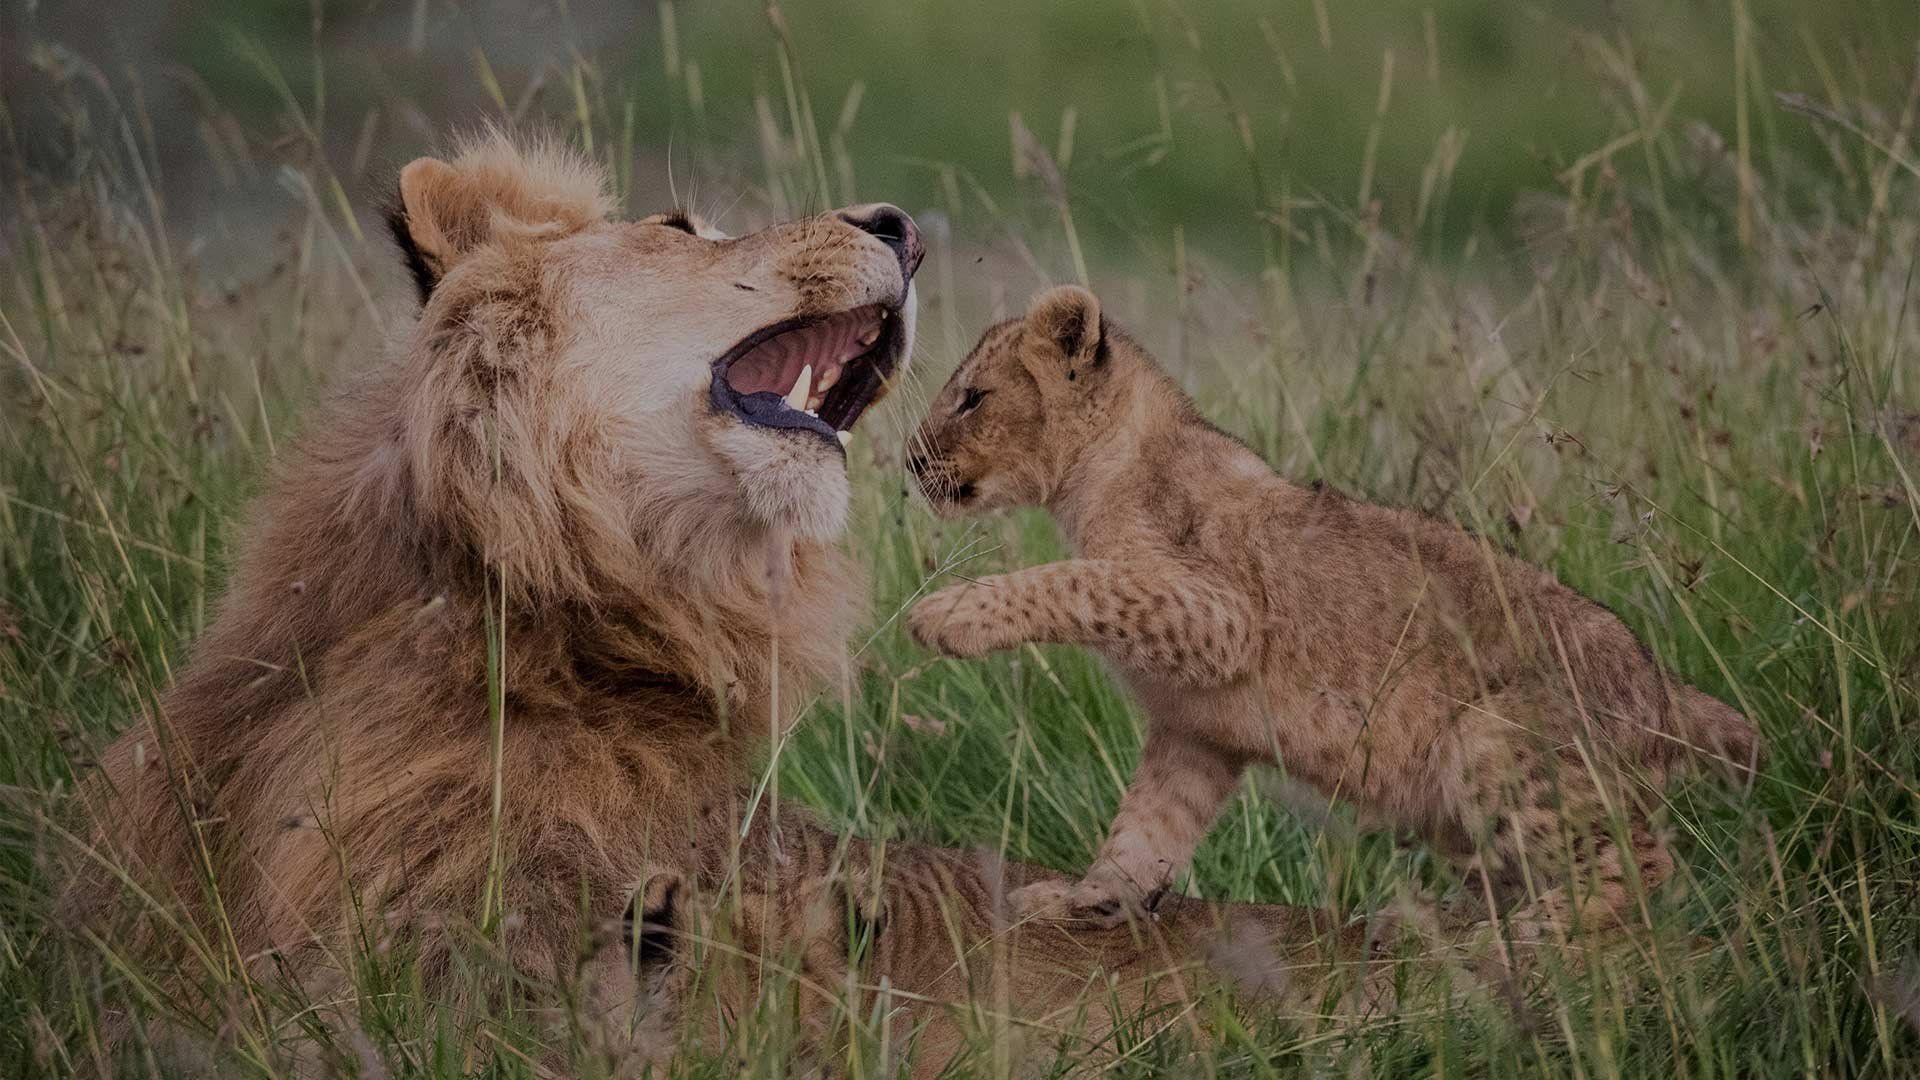 A lion cub clambers over an adult male lion lying in long grass, who raises his head in a mock roar.